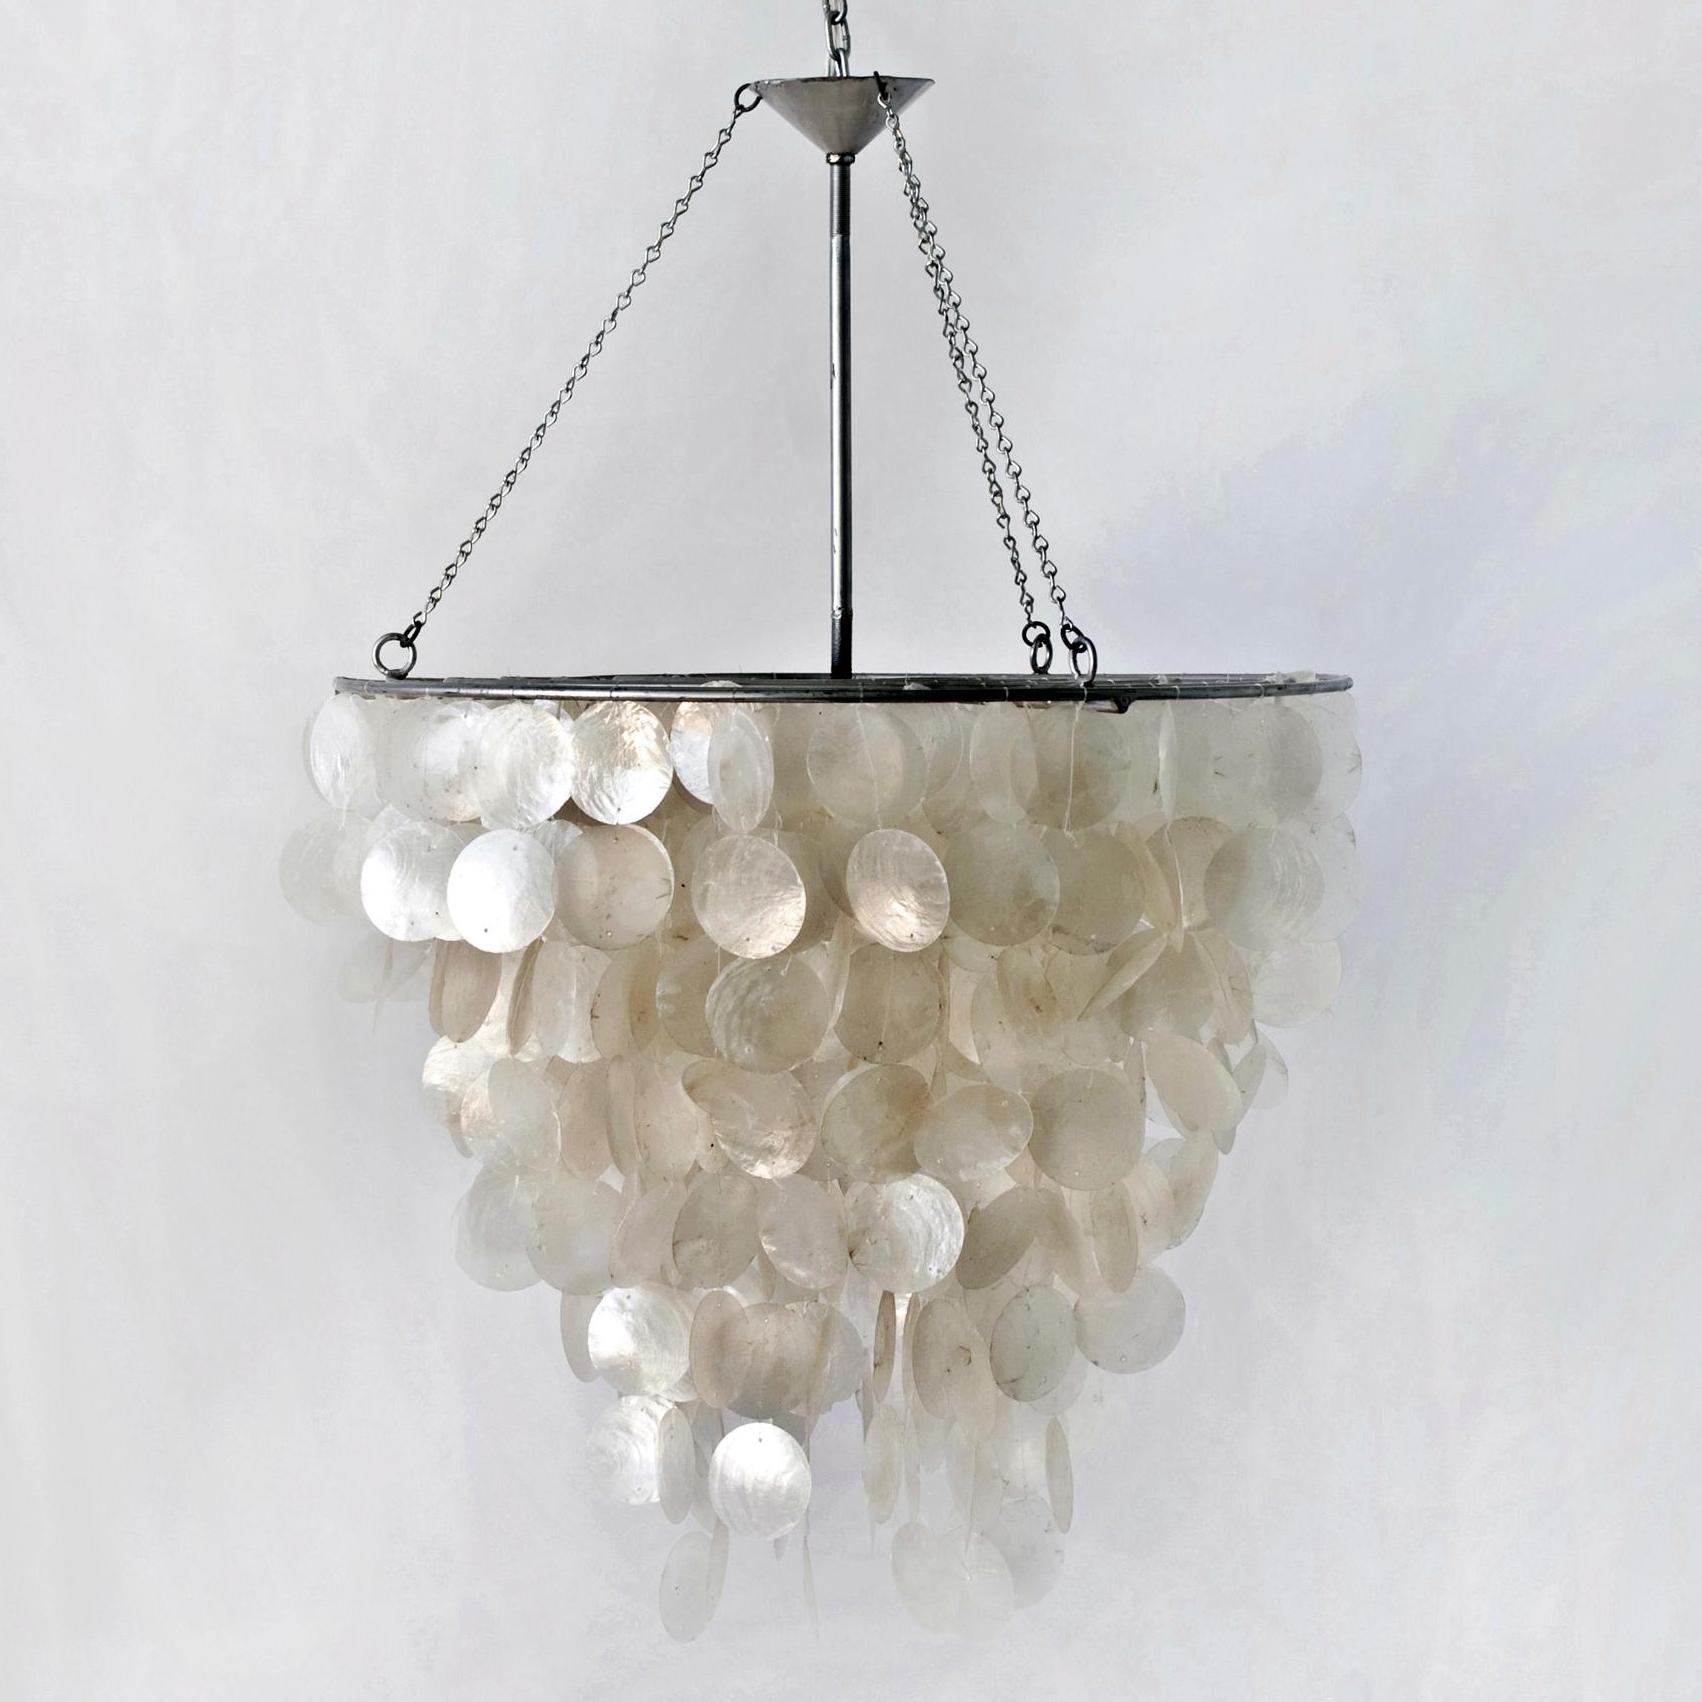 Permalink to Capiz Shell Ceiling Lights